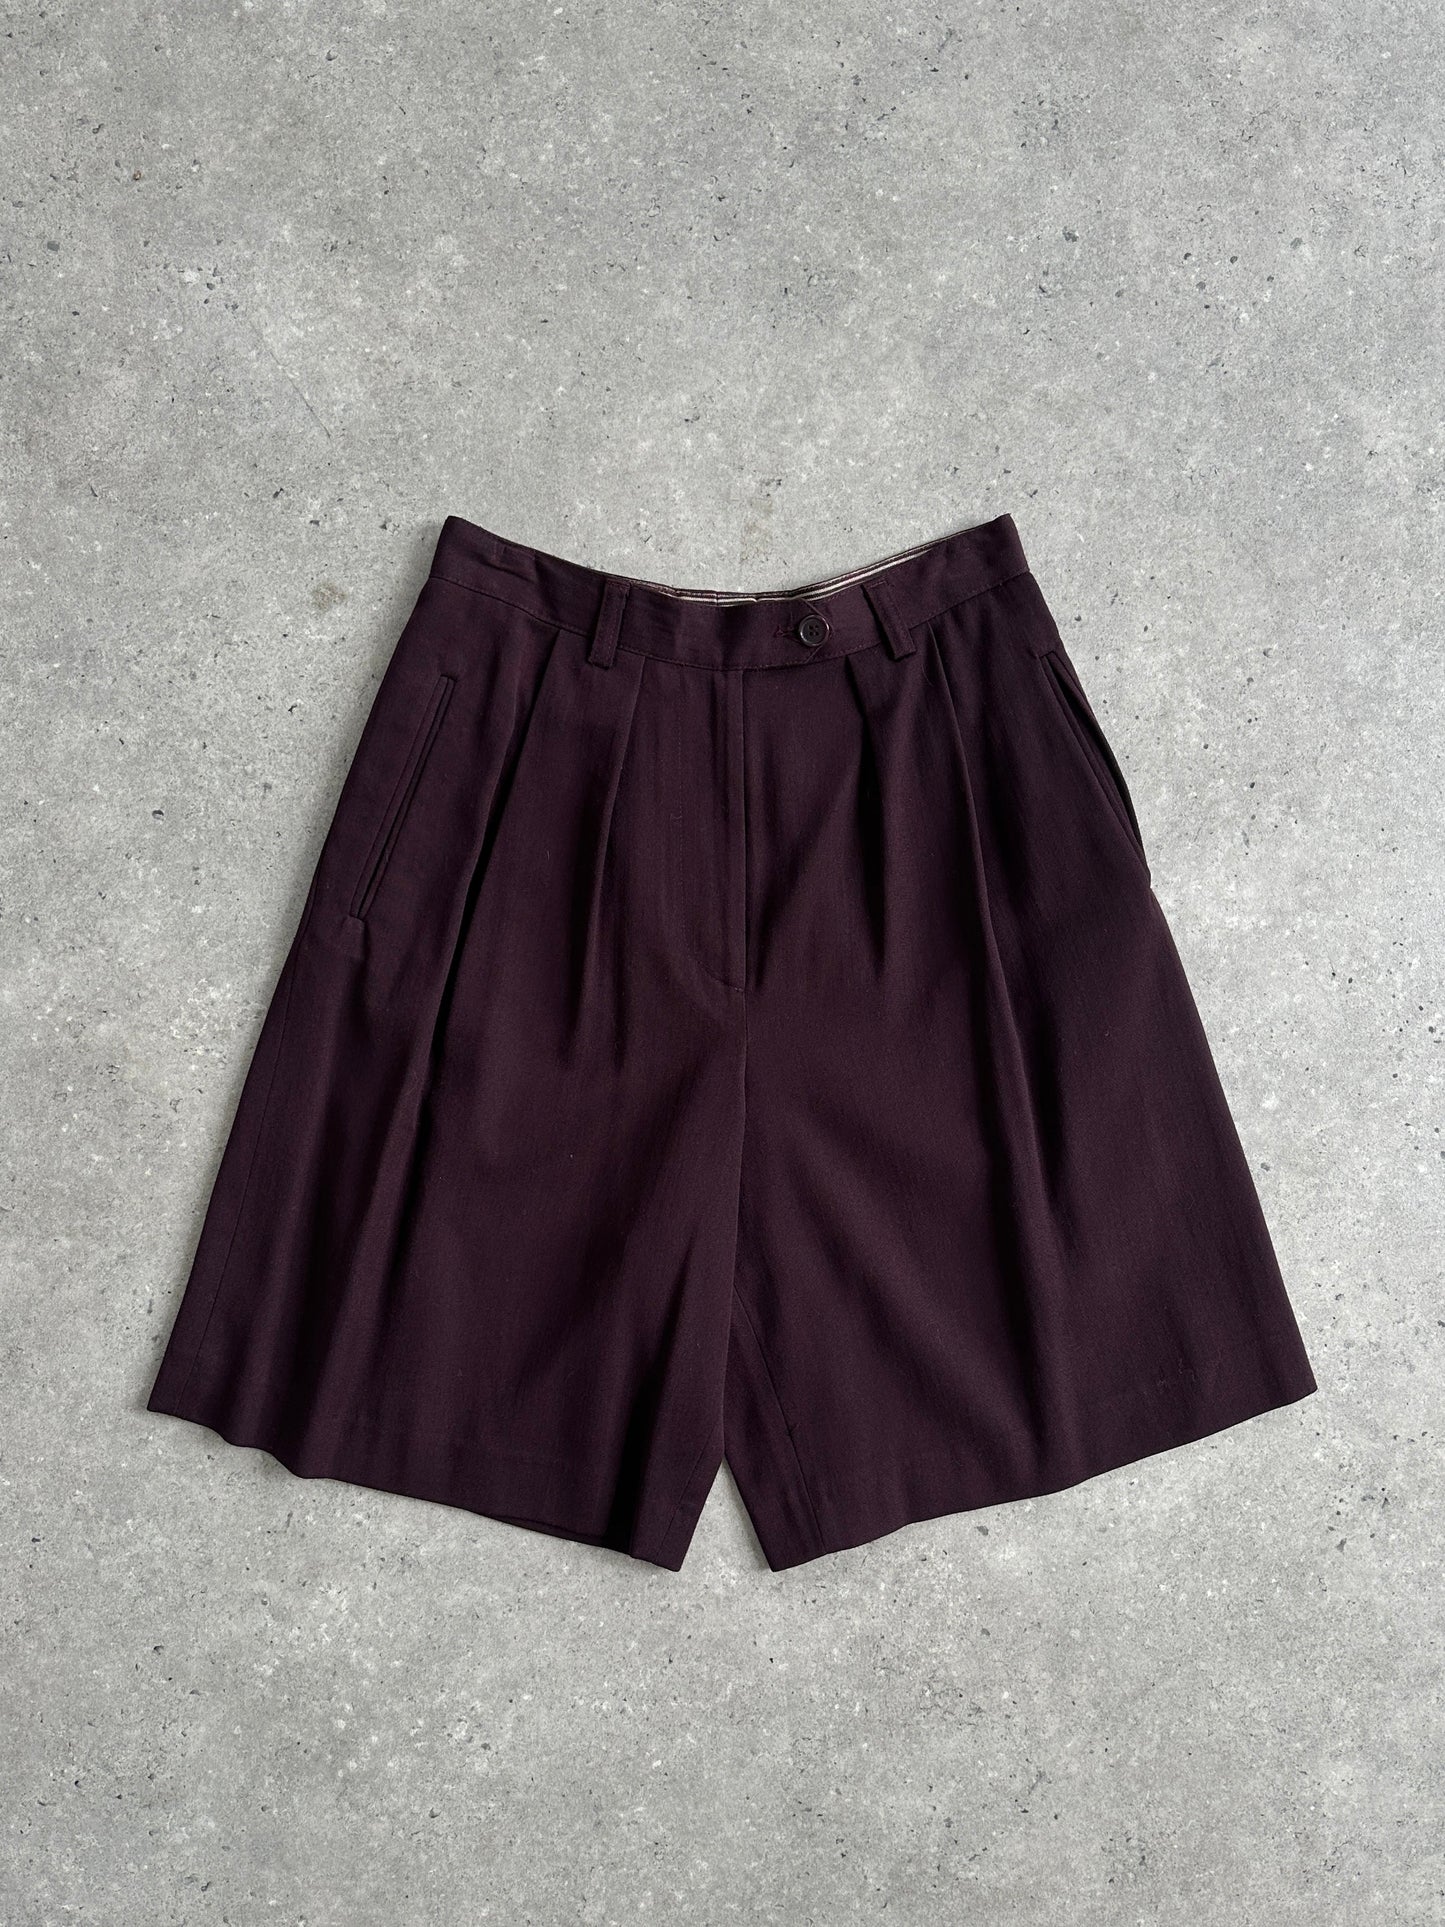 Emporio Armani Wool High Waisted Tailored Shorts - W26